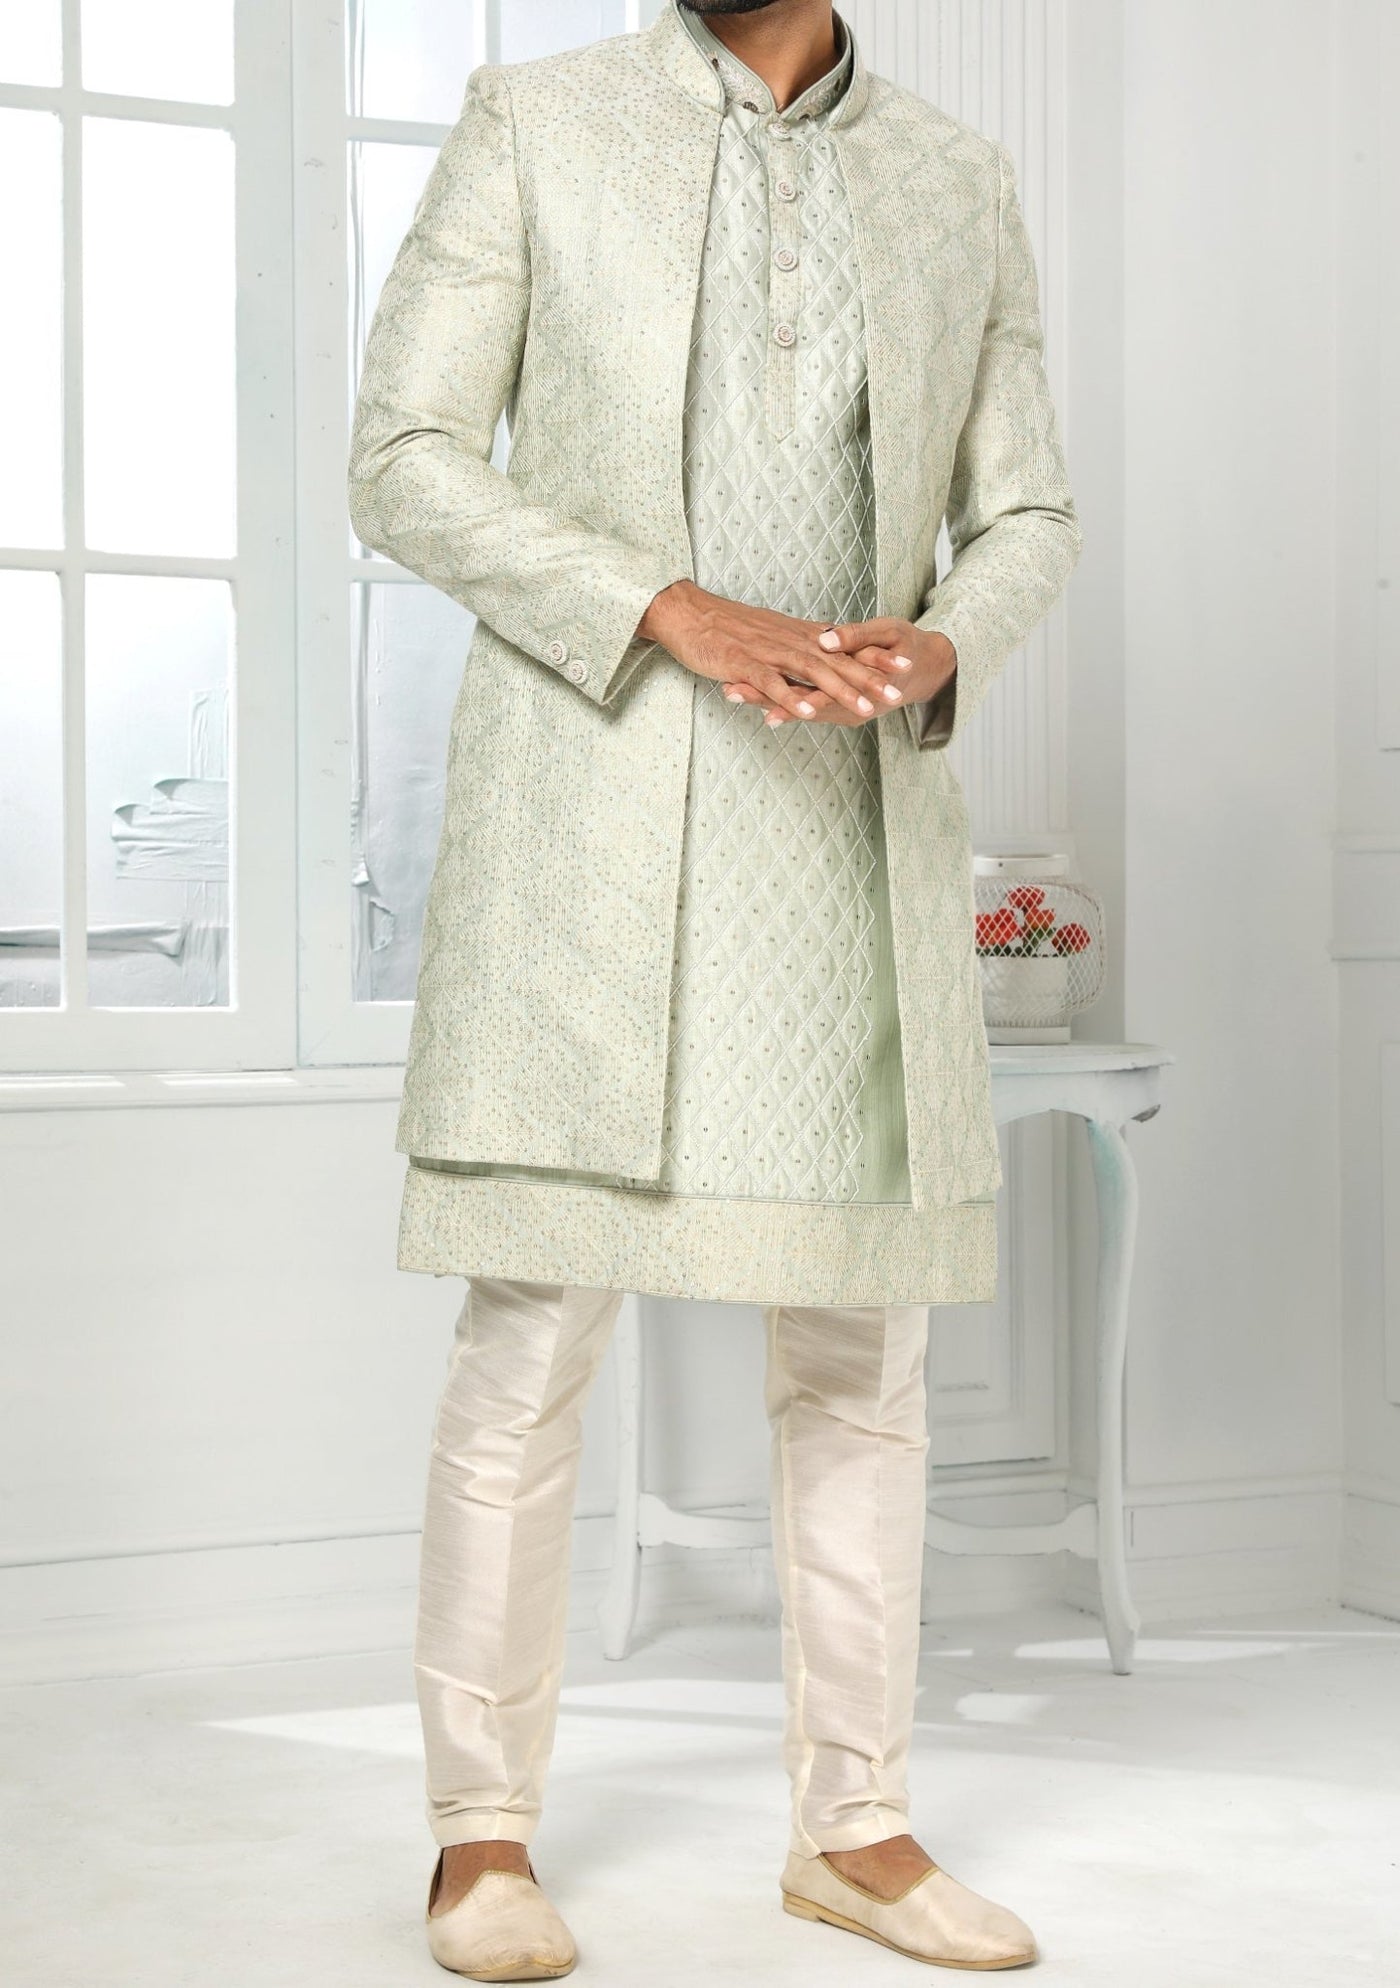 Men's Indo Western Party Wear Sherwani Suit With Jacket - db20427